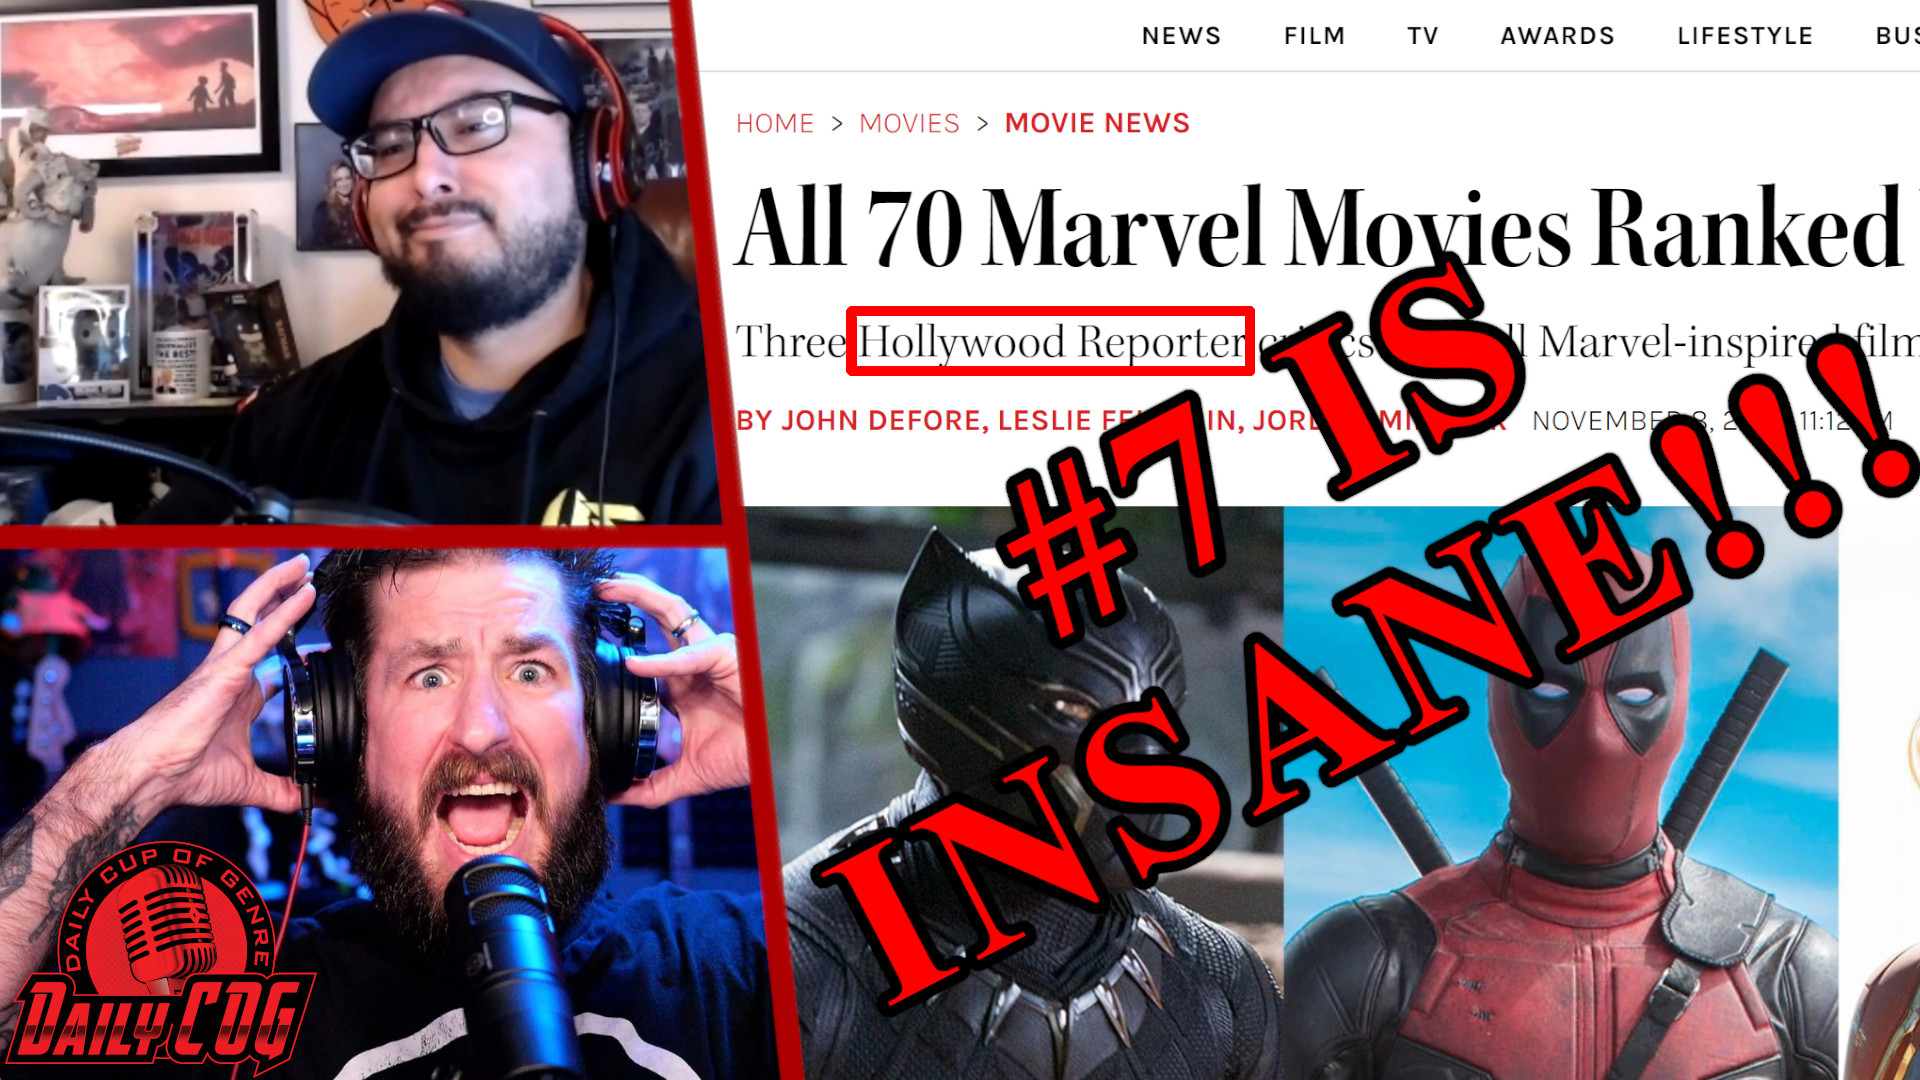 You’ll Hate This List! Reacting To THR’s Marvel Movie Rankings | D-COG